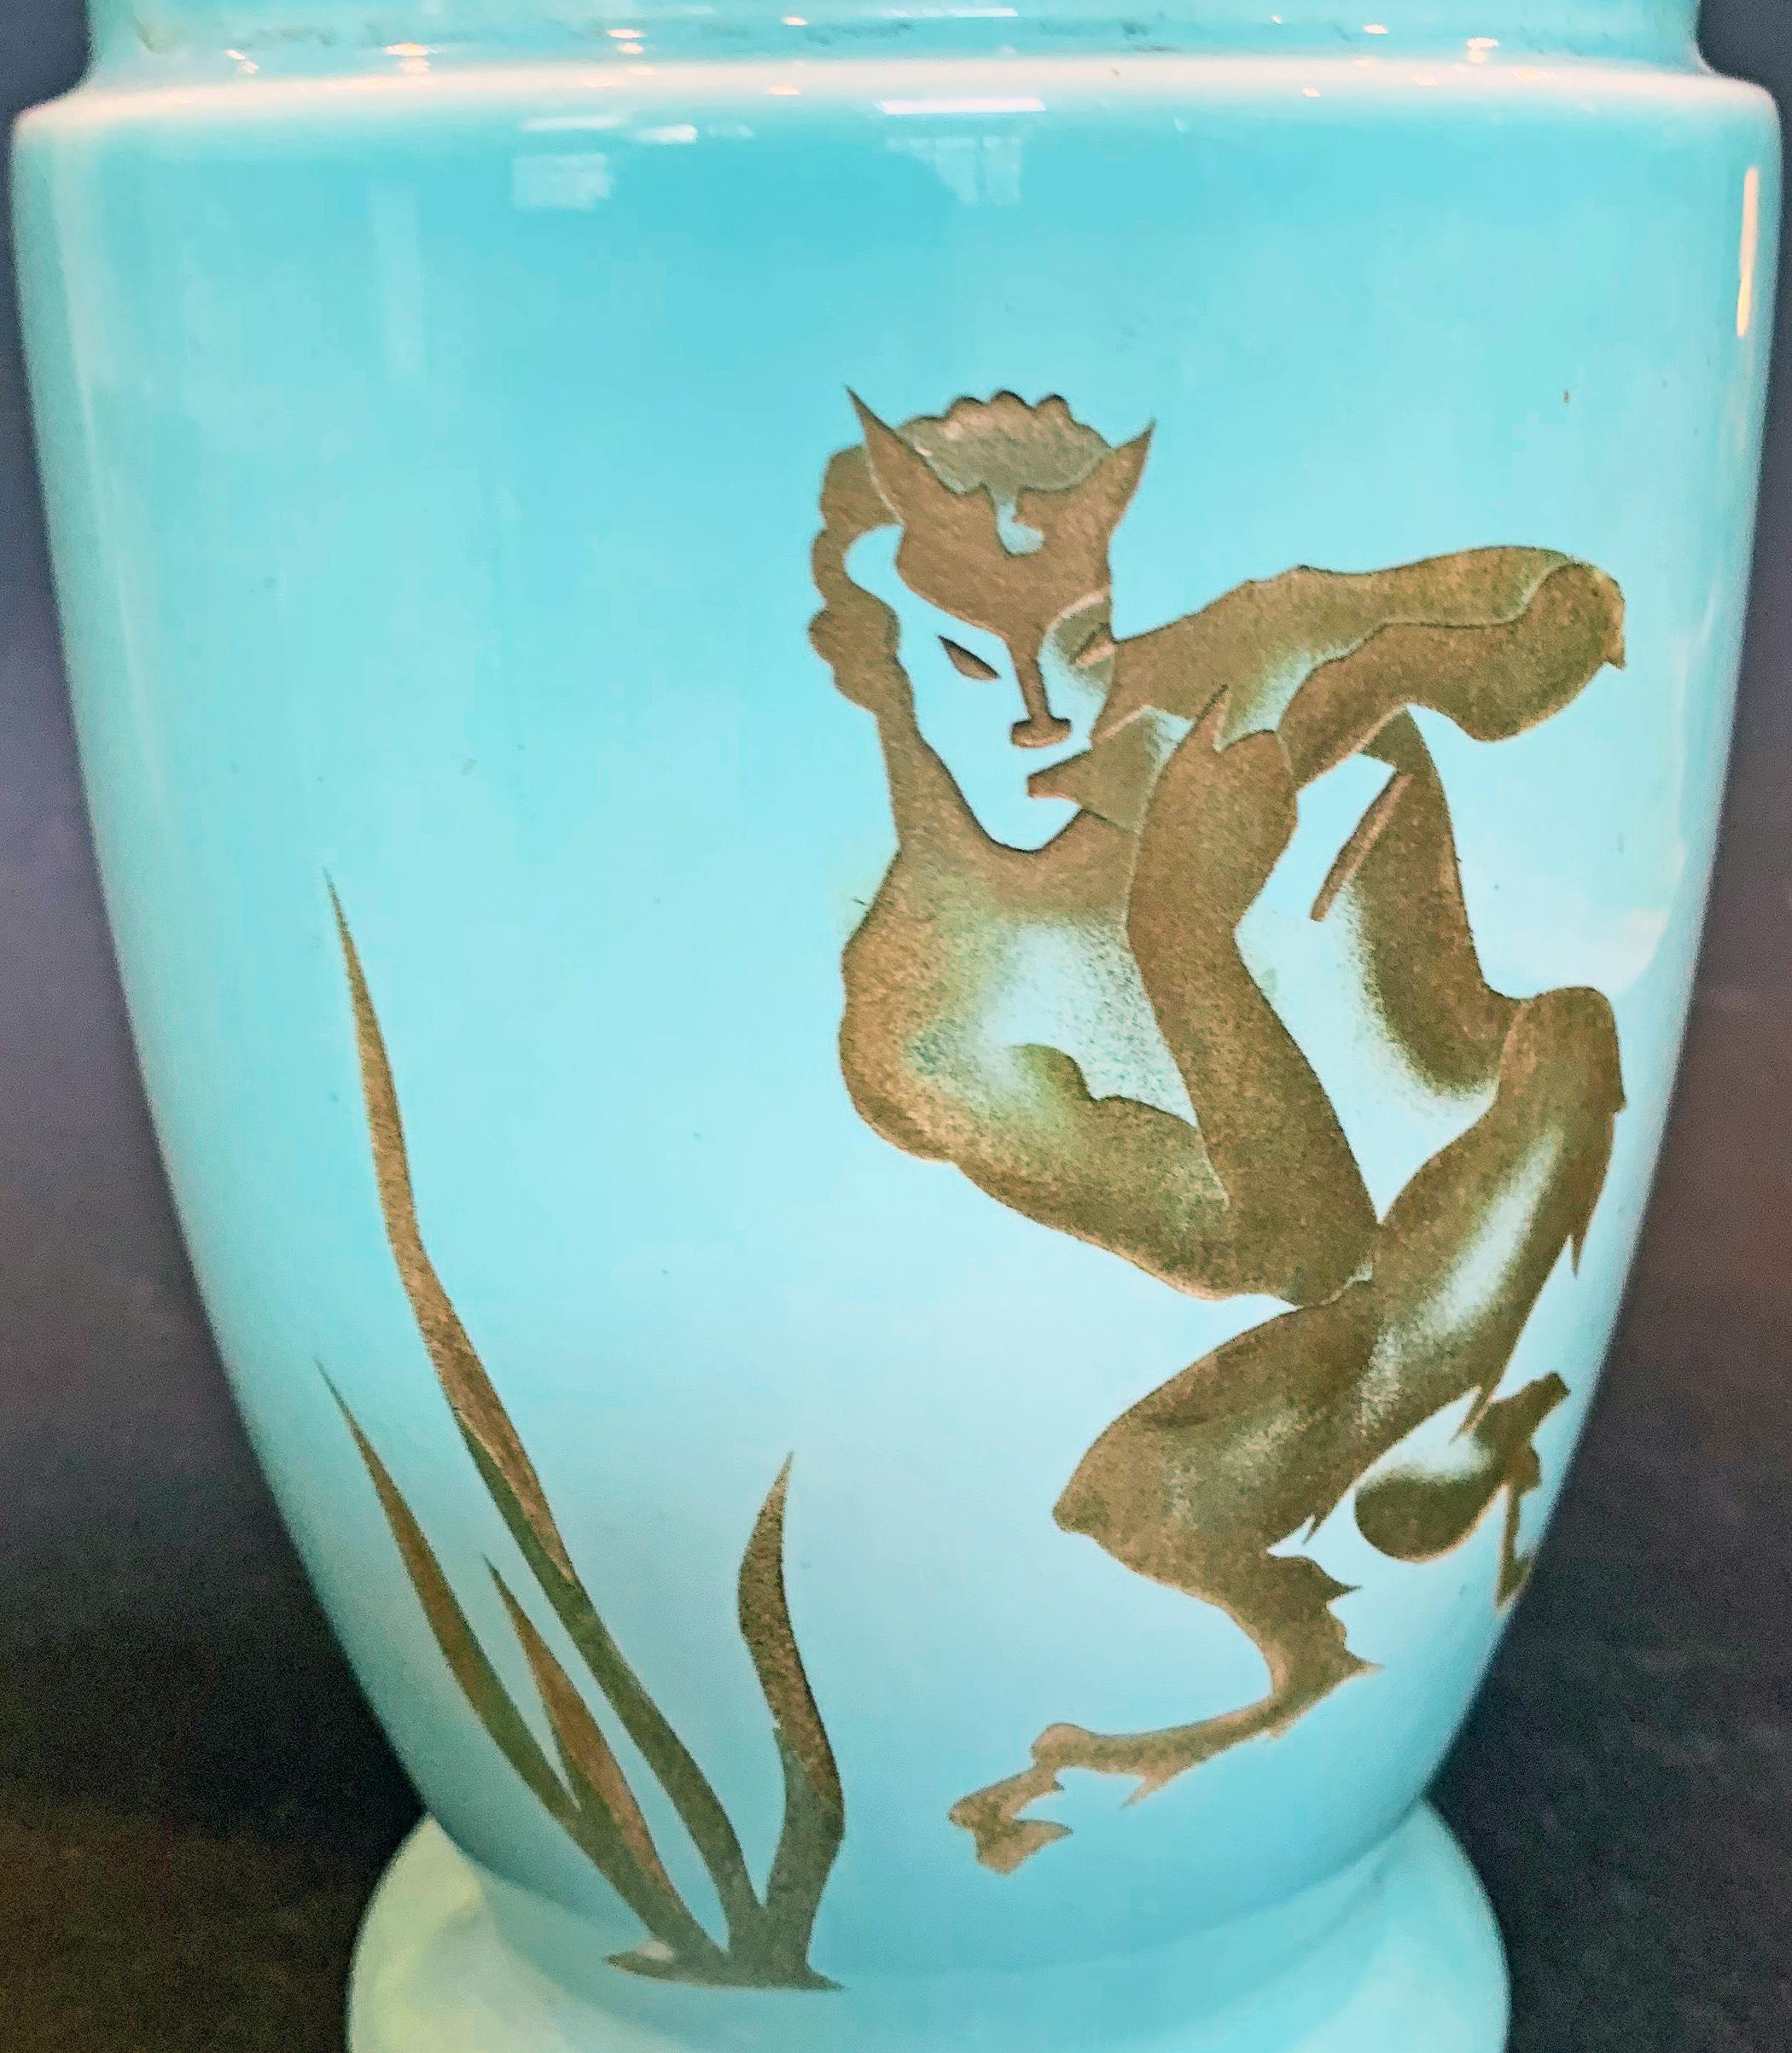 To our knowledge, this remarkable vase -- produced by the famed Trenton Potteries Company in the 1930s -- is unique. Starting with a simple blue ceramic vase, the artist etched a dancing satyr figure, playing the panpipe, into the surface, and then